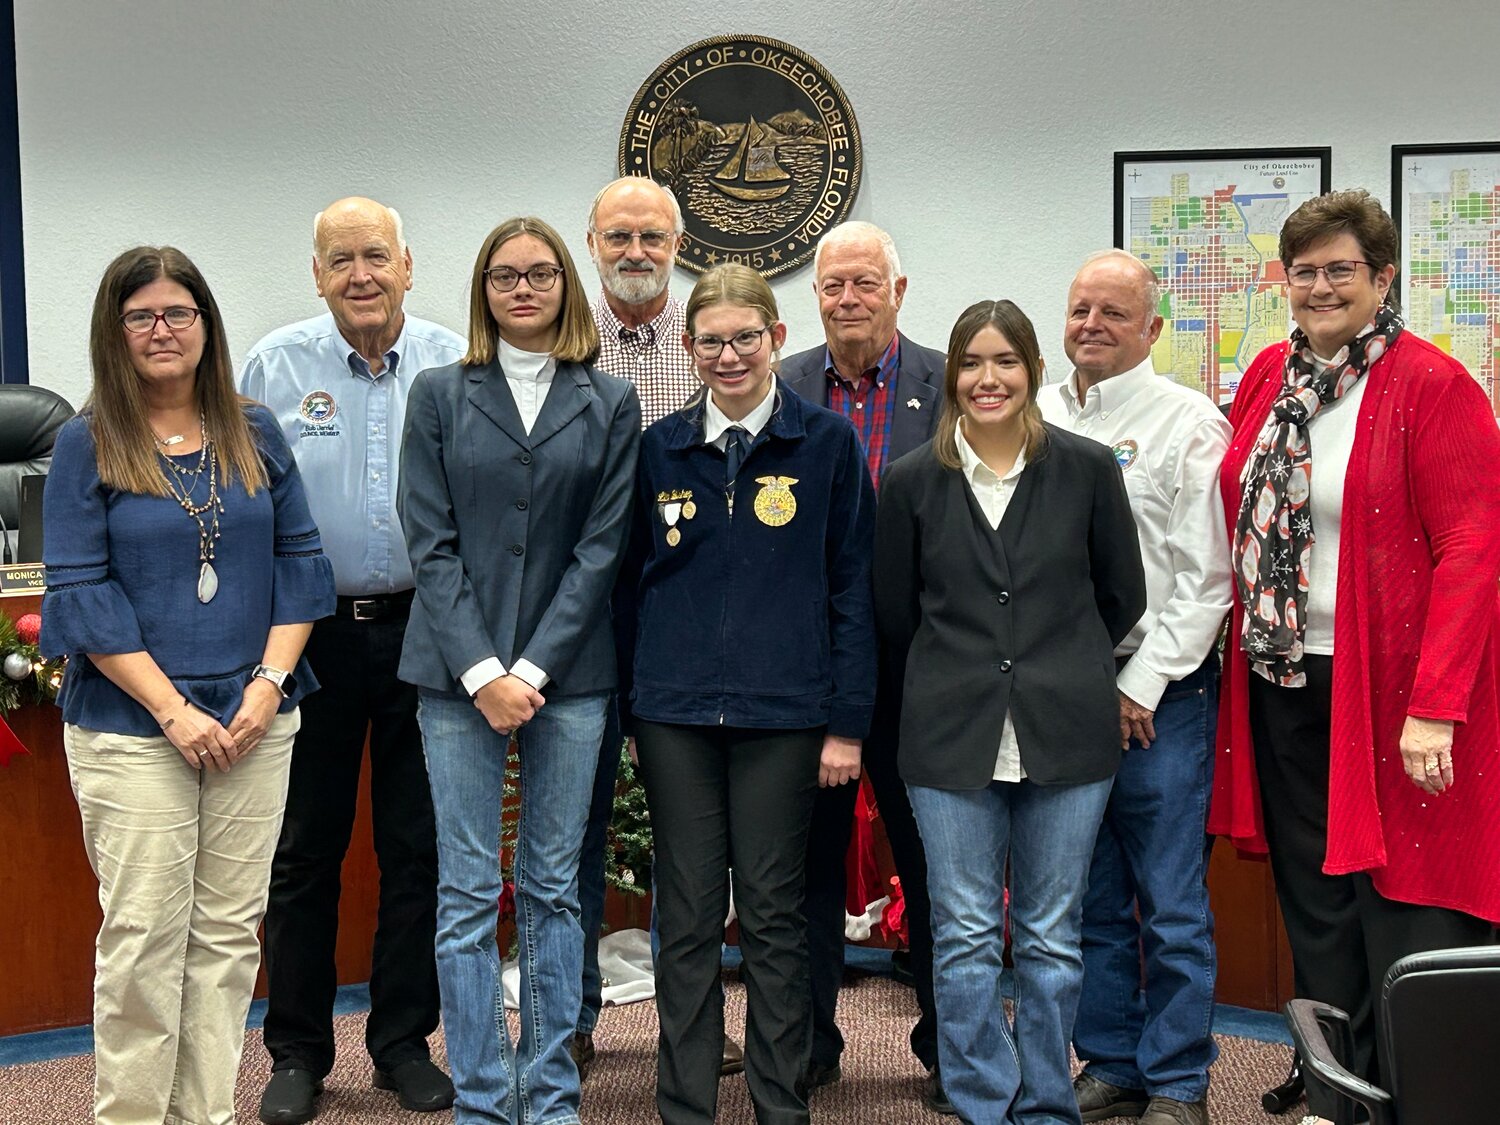 During its Dec. 5 meeting, the Okeechobee City Council recognized the achievemnts of three local youths. Pictured left to right (front row) are Paula Daniel, Emily Hilderbrand, Lila Bishop and Alyssa Cortez. (Back row) Councilman Bob Jarriel, Councilman David McAuley, Mayor Dowling Watford, Councilman Noel Chandler and Vice-Mayor Monica Clark.